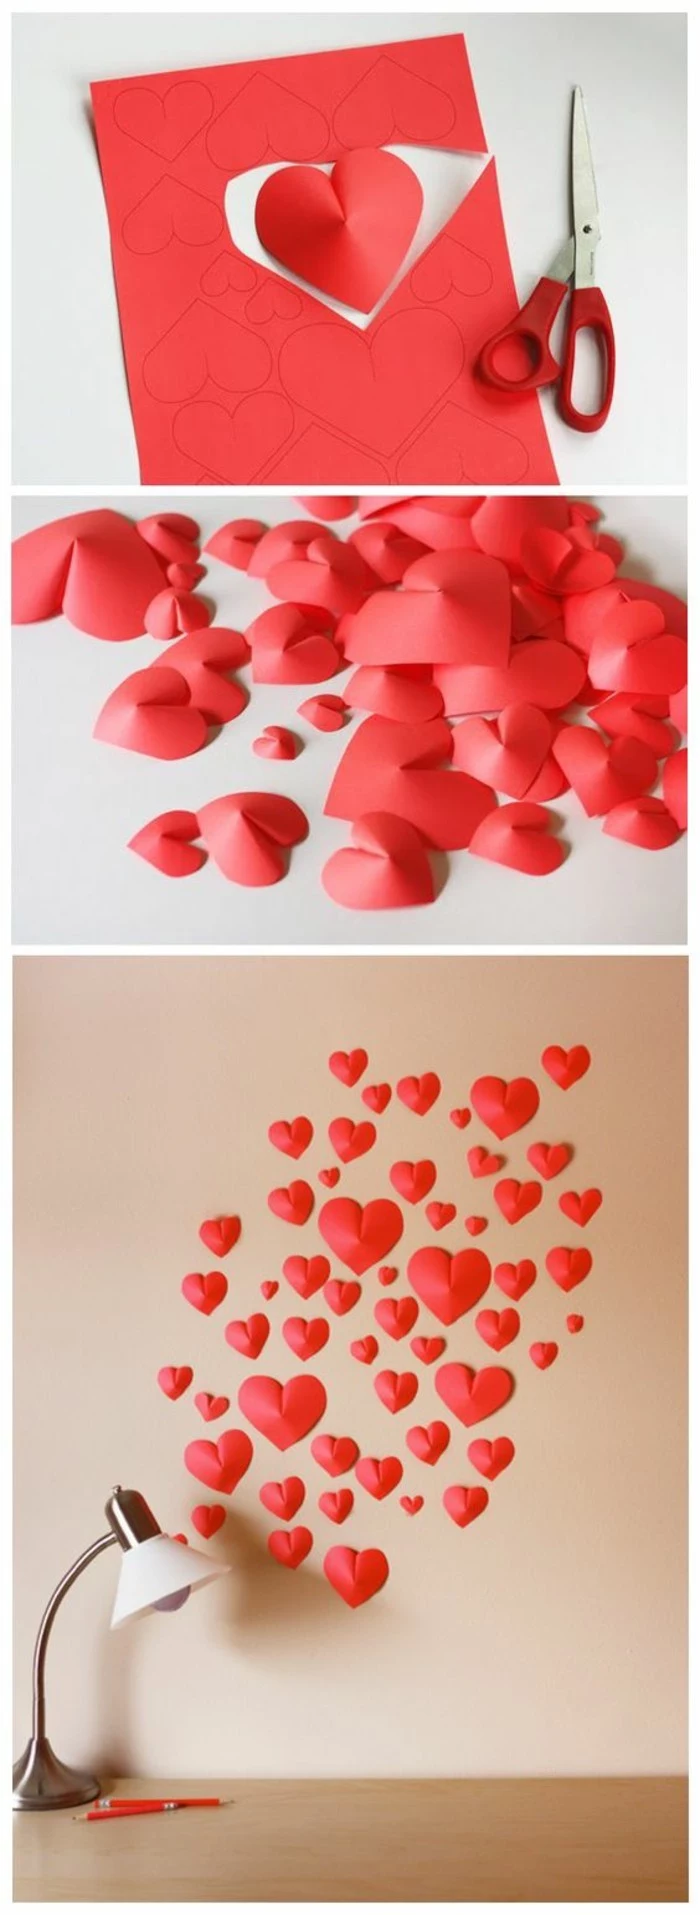 red paper hearts, arranged together on a beige wall, diy living room decor, over a wooden desk